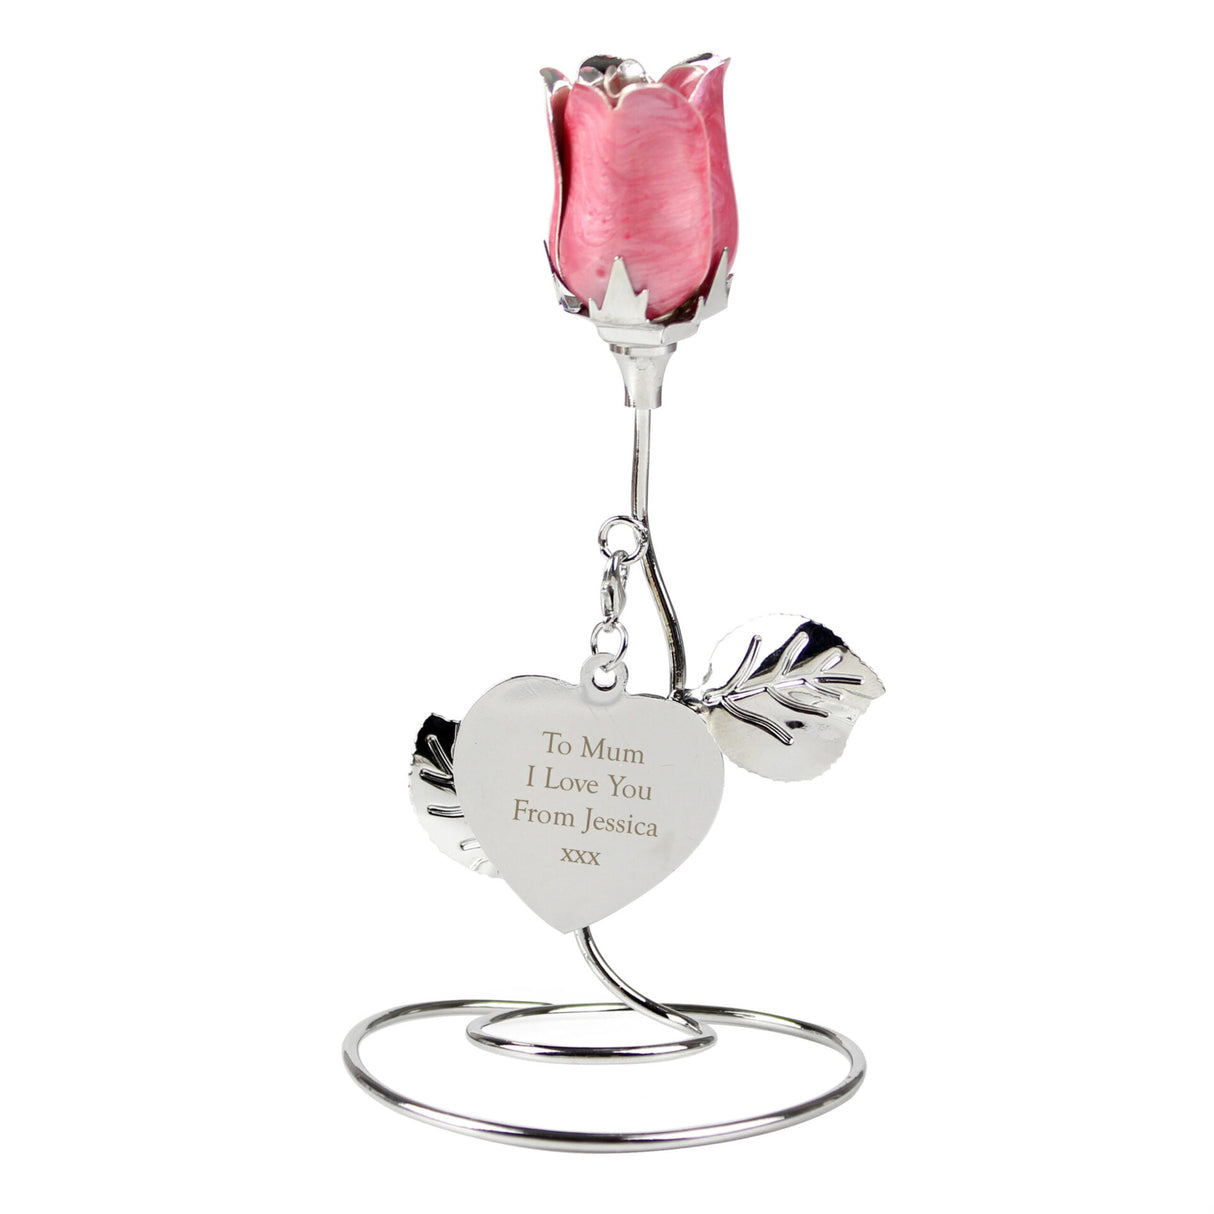 Free Text Pink Rose Bud Ornament - Gift Moments